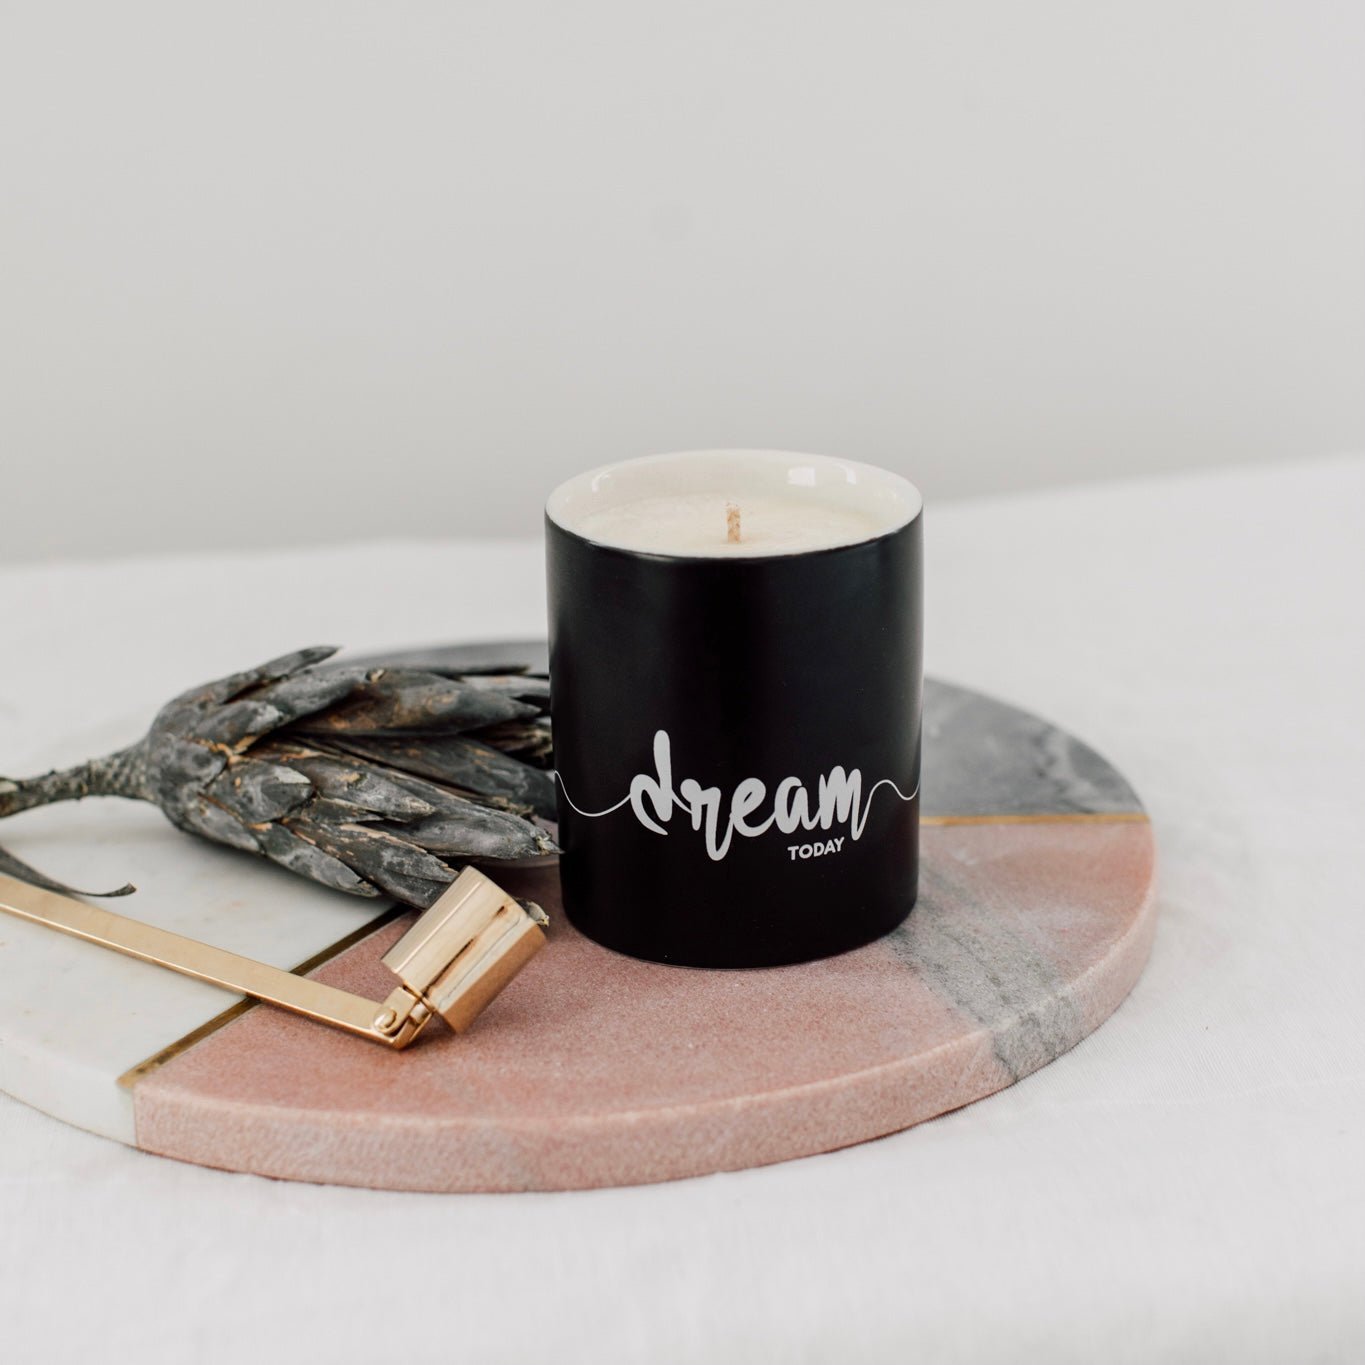 Wild Rose, Moss and Woodland Musk scented soy candles